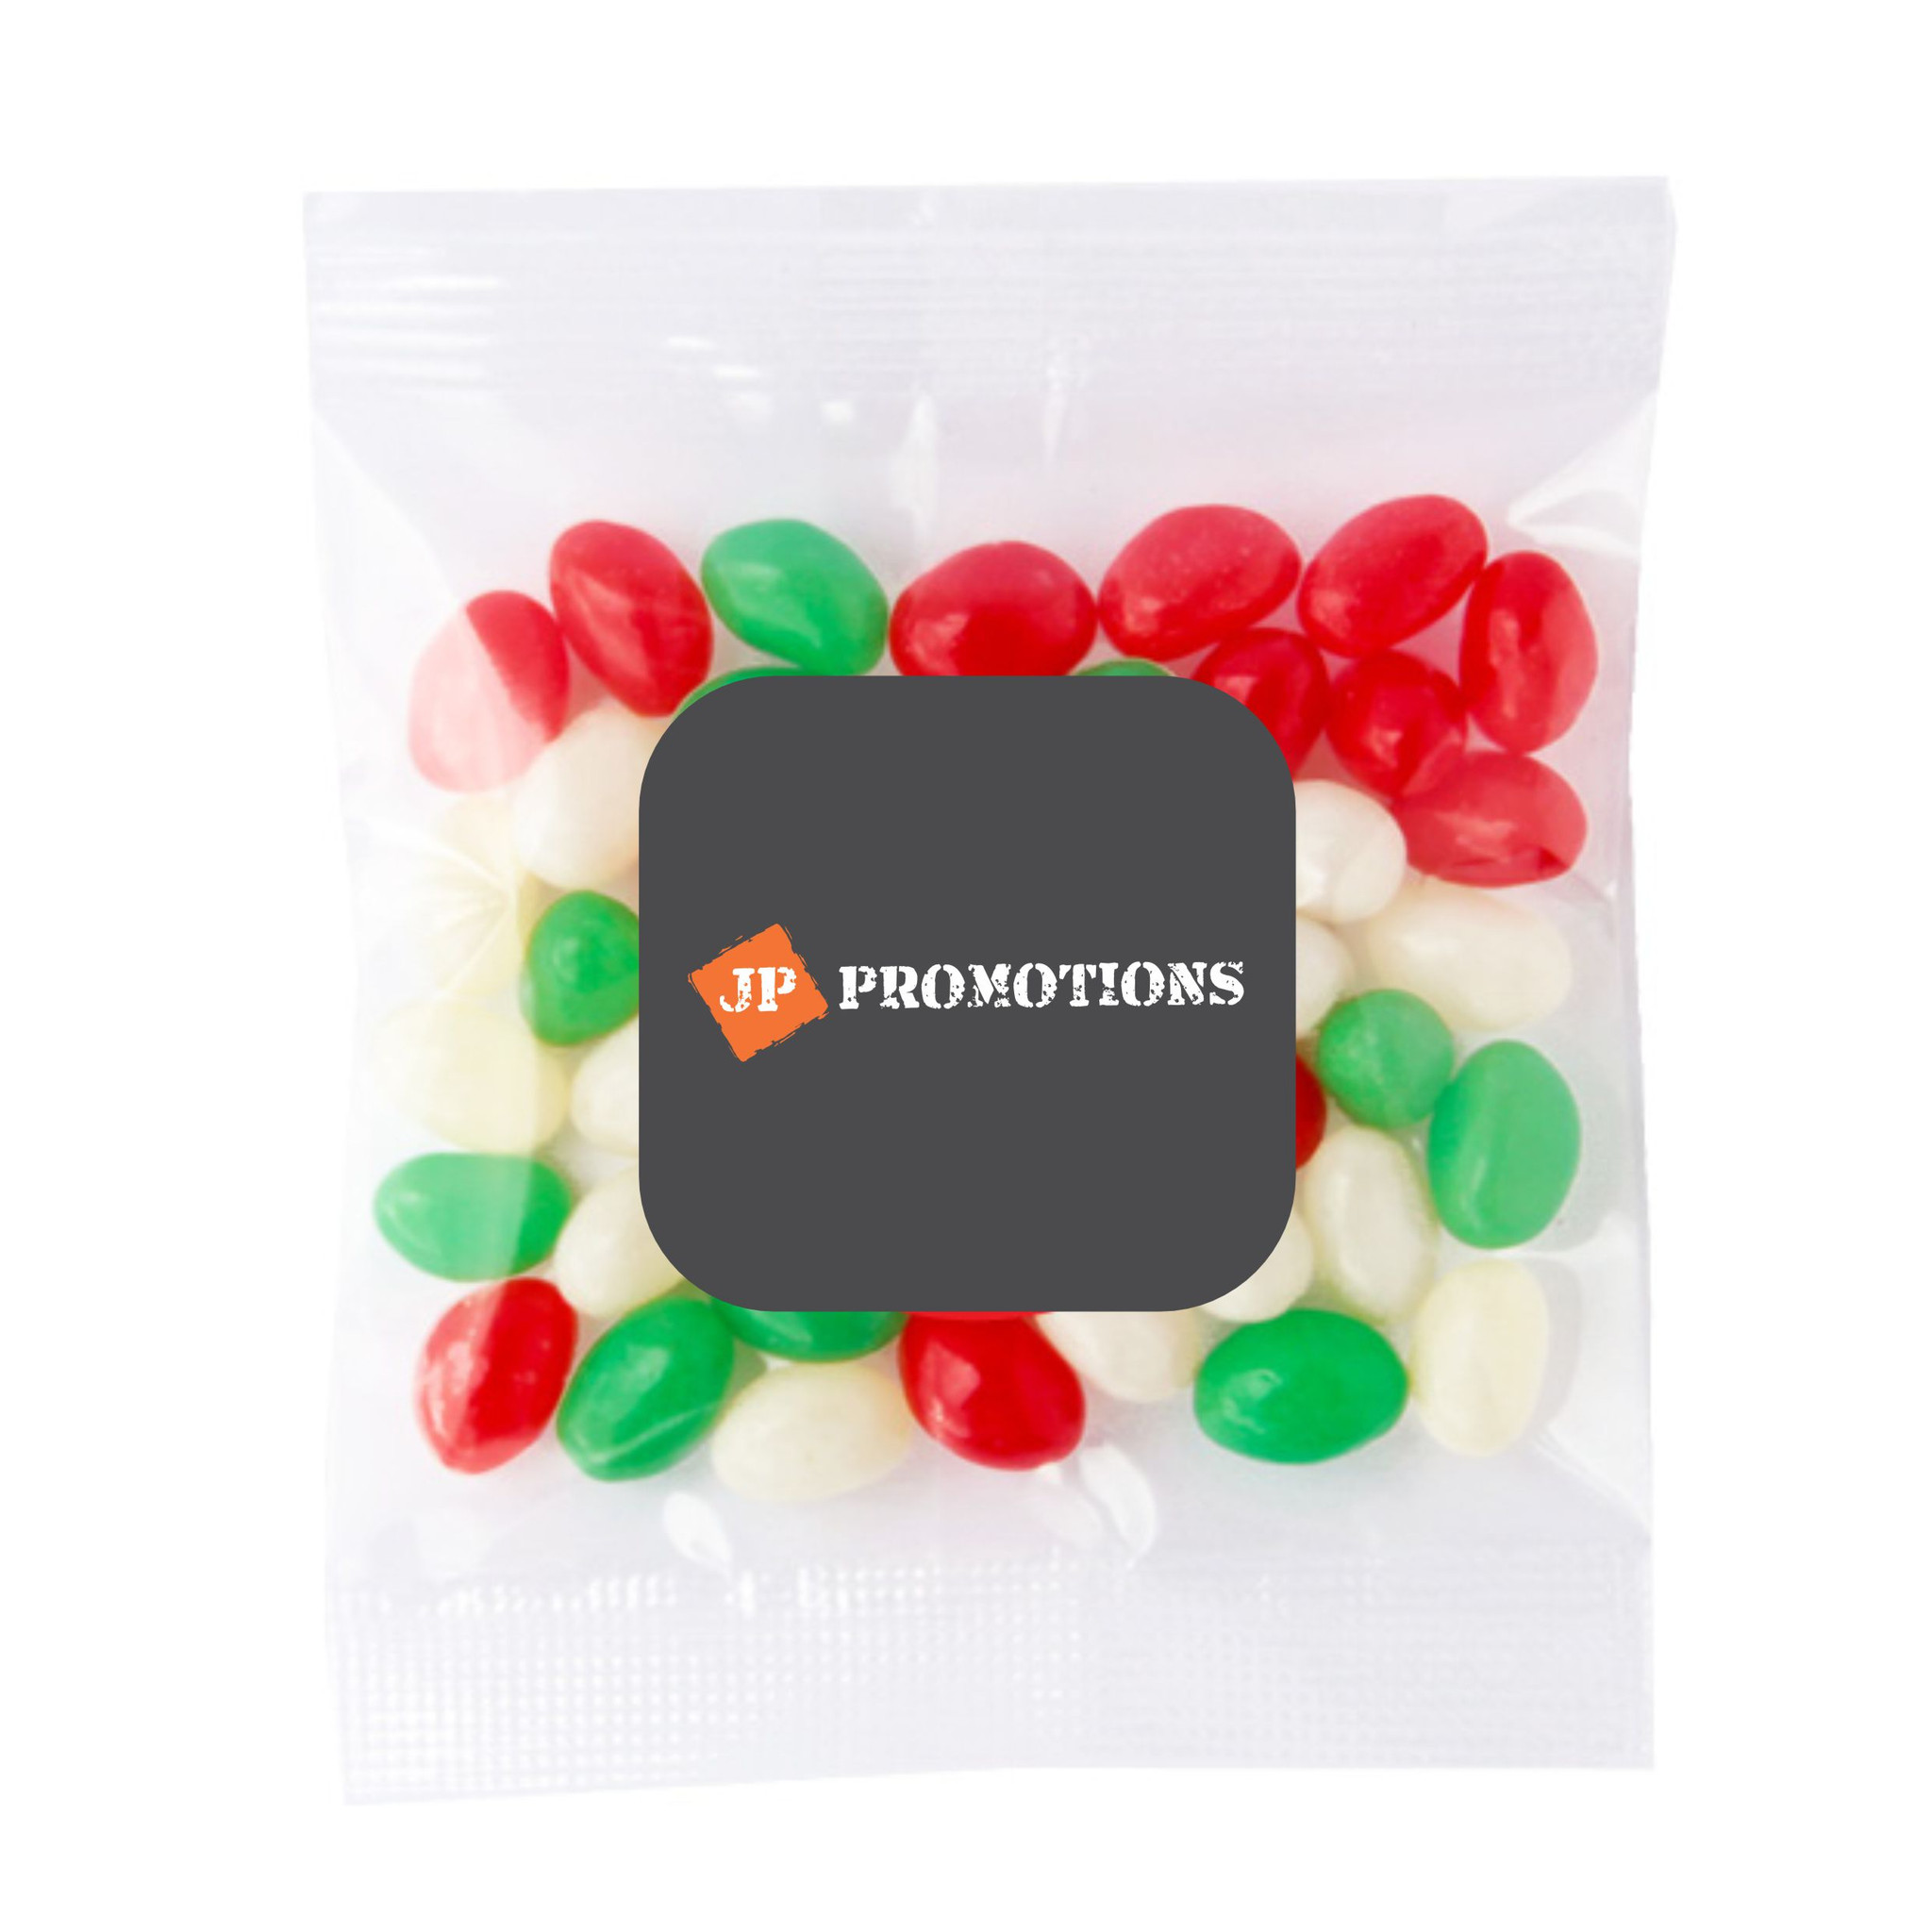 *NEW* Corporate Colour Mini Jelly Beans - 50g